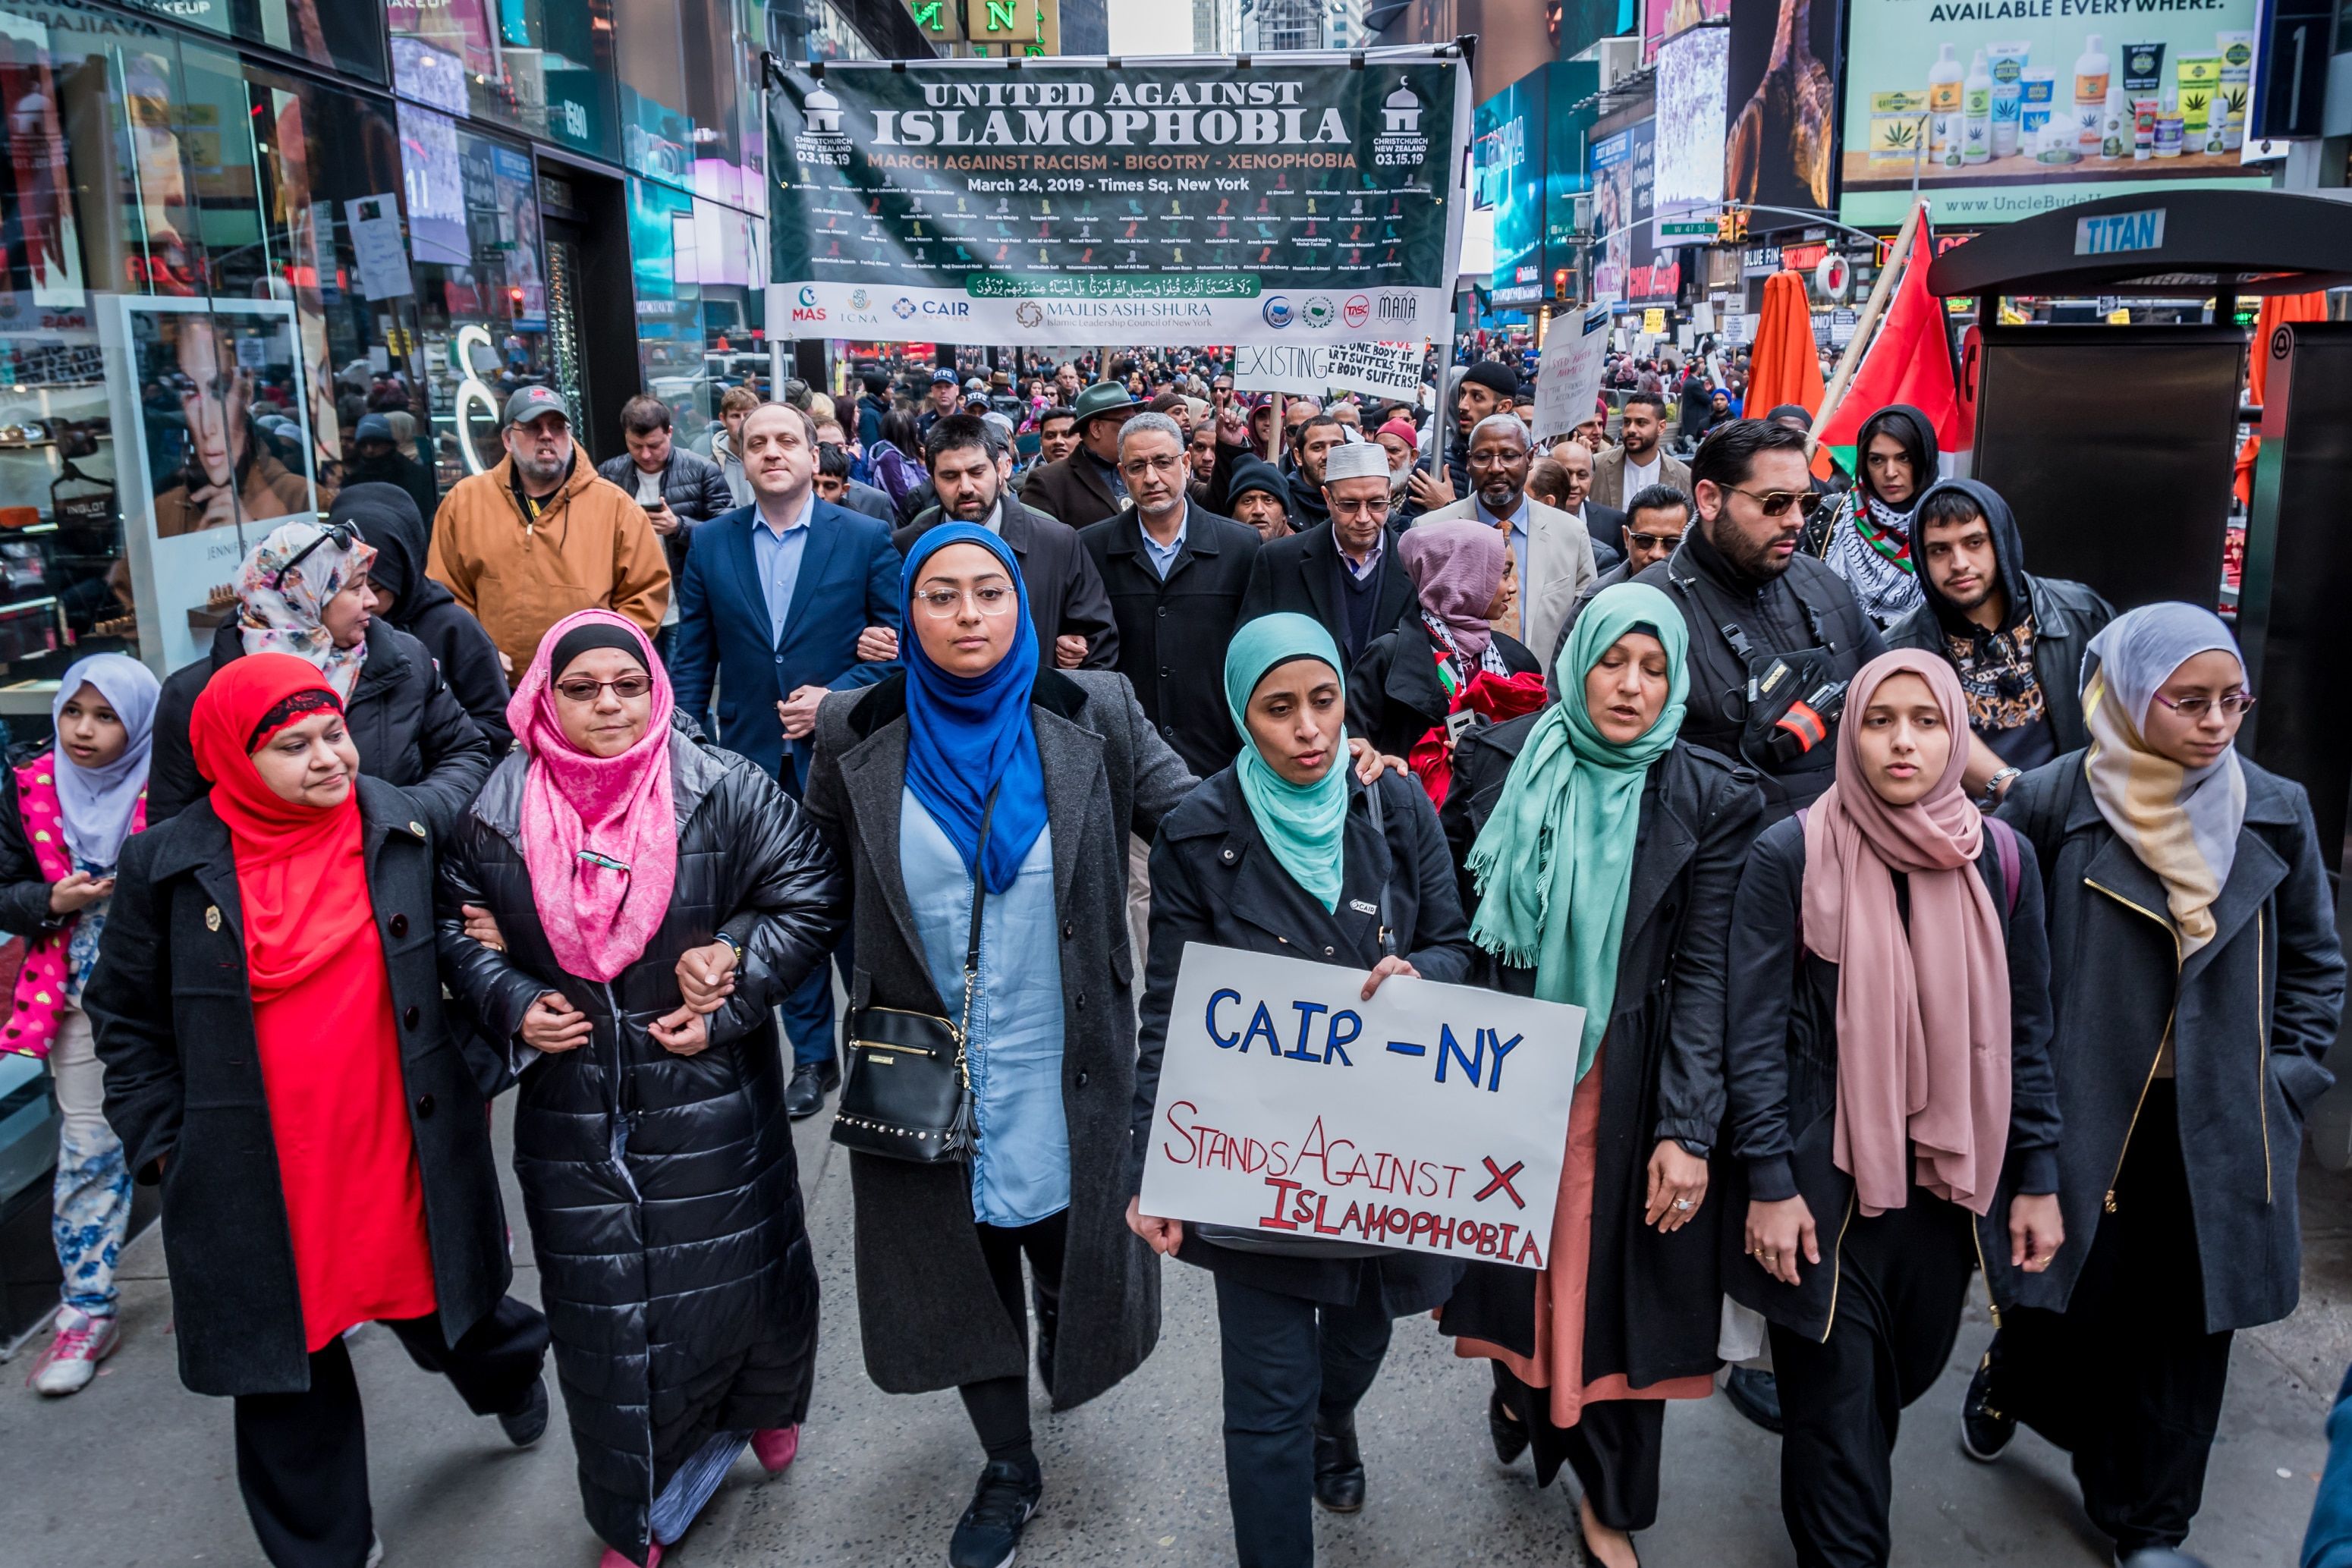 Muslim leaders and allies at a rally against Islamophobia in New York's Times Square in 2019.